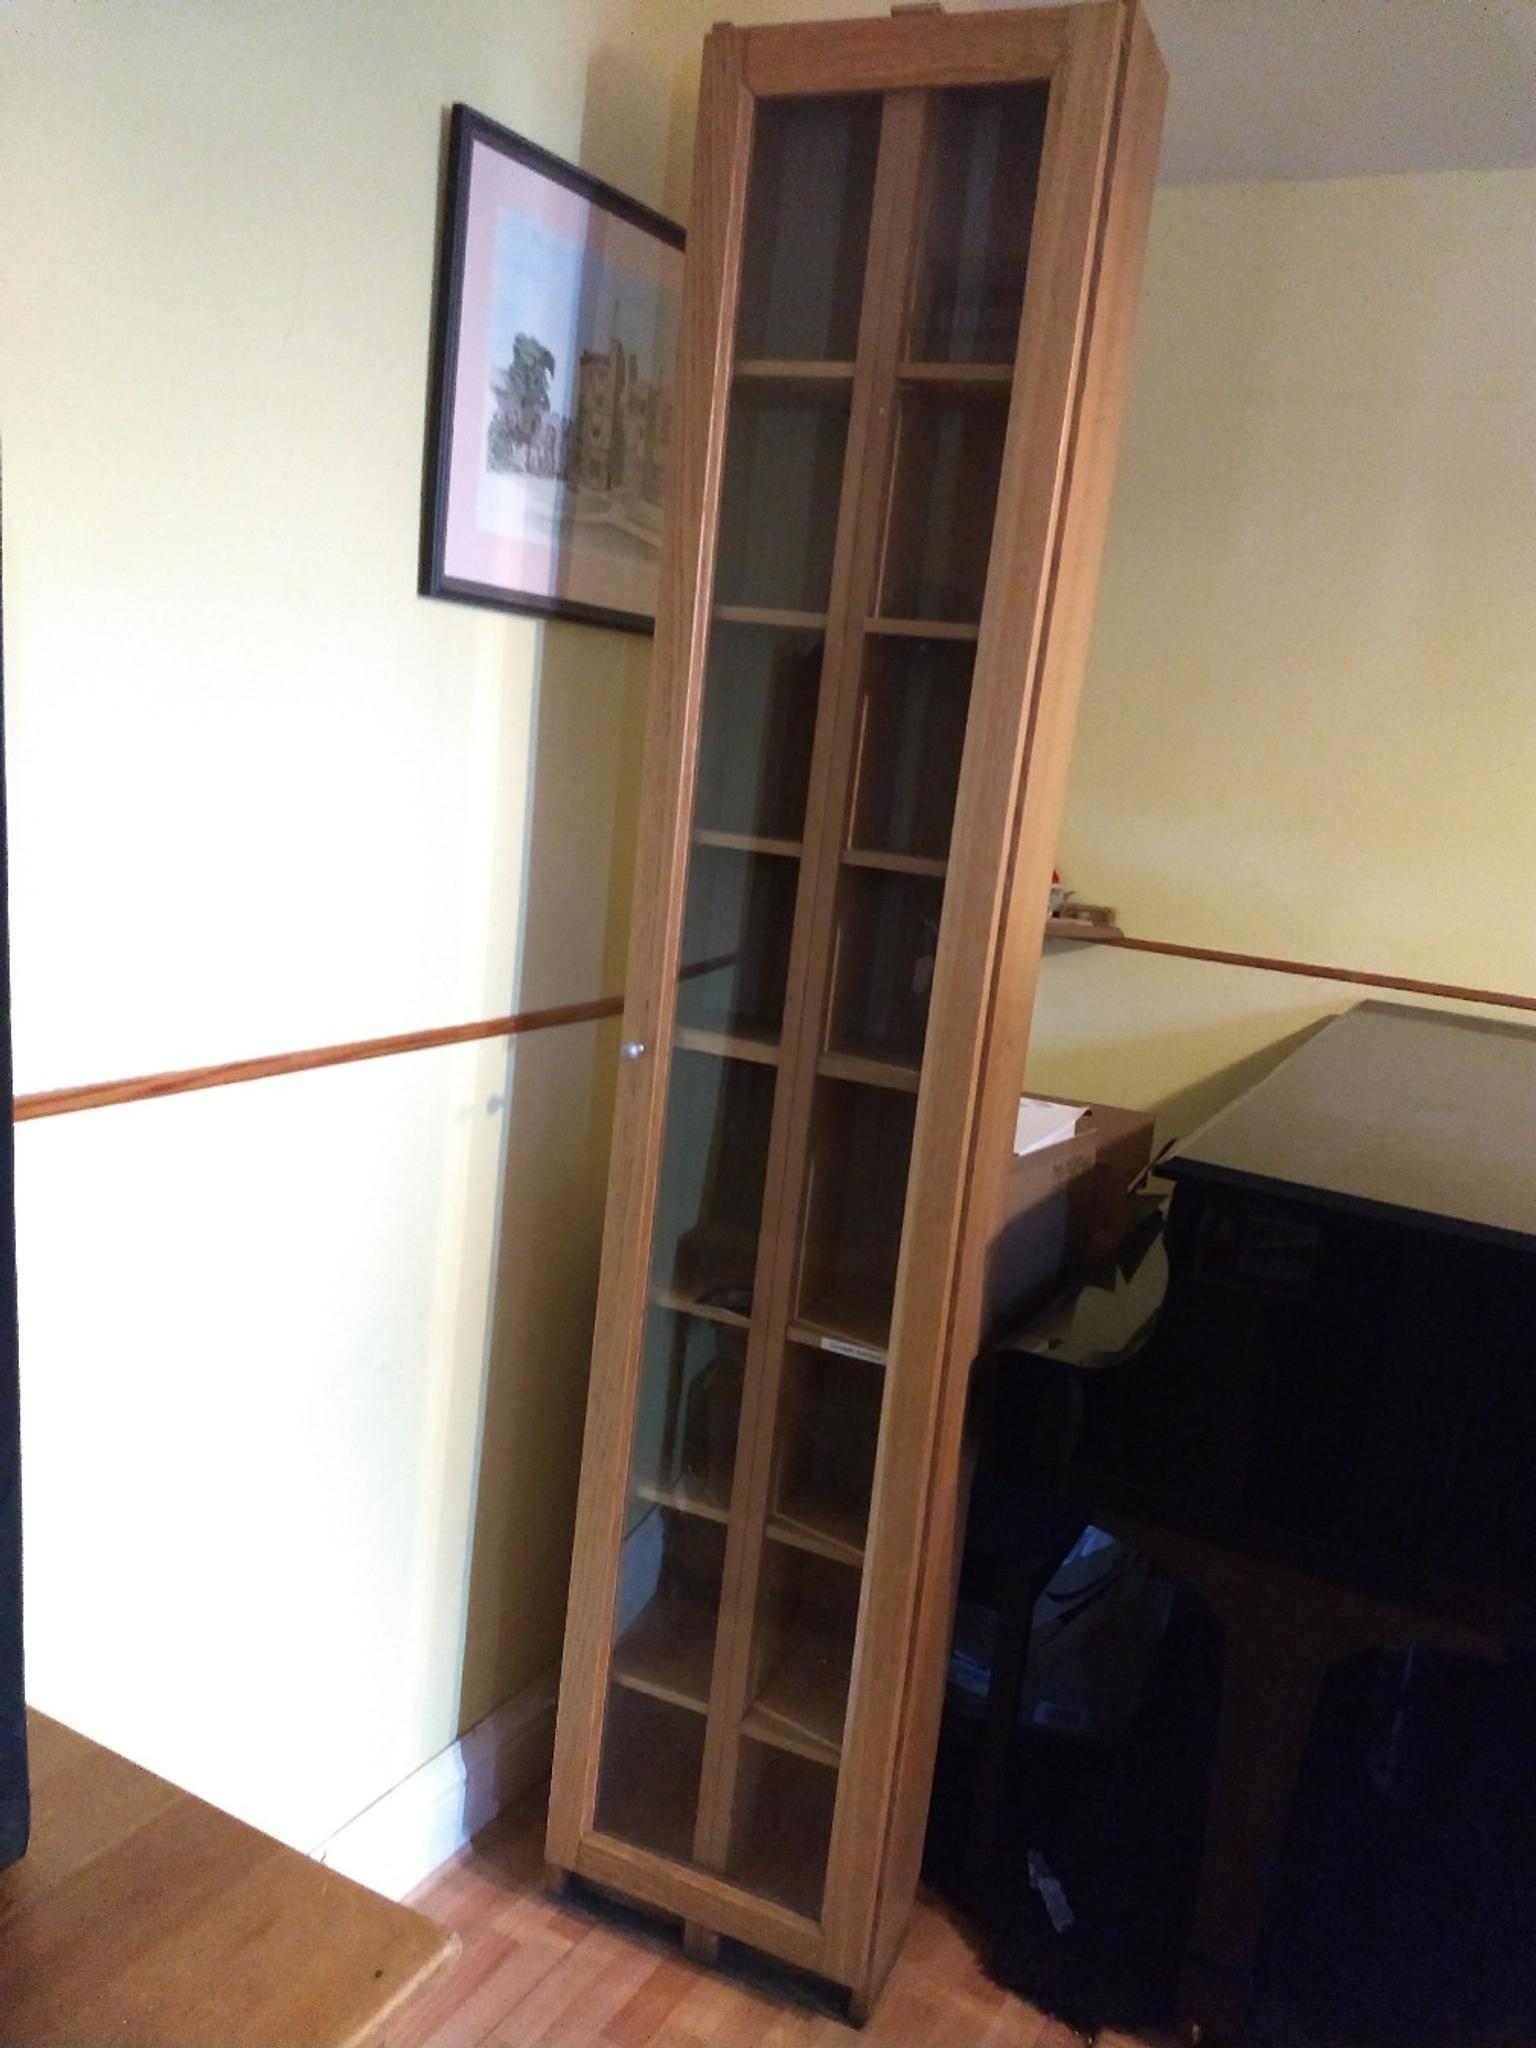 Ikea Dvd Cd Cabinet With Glass Door In Bs34 Gifford For 8 00 For